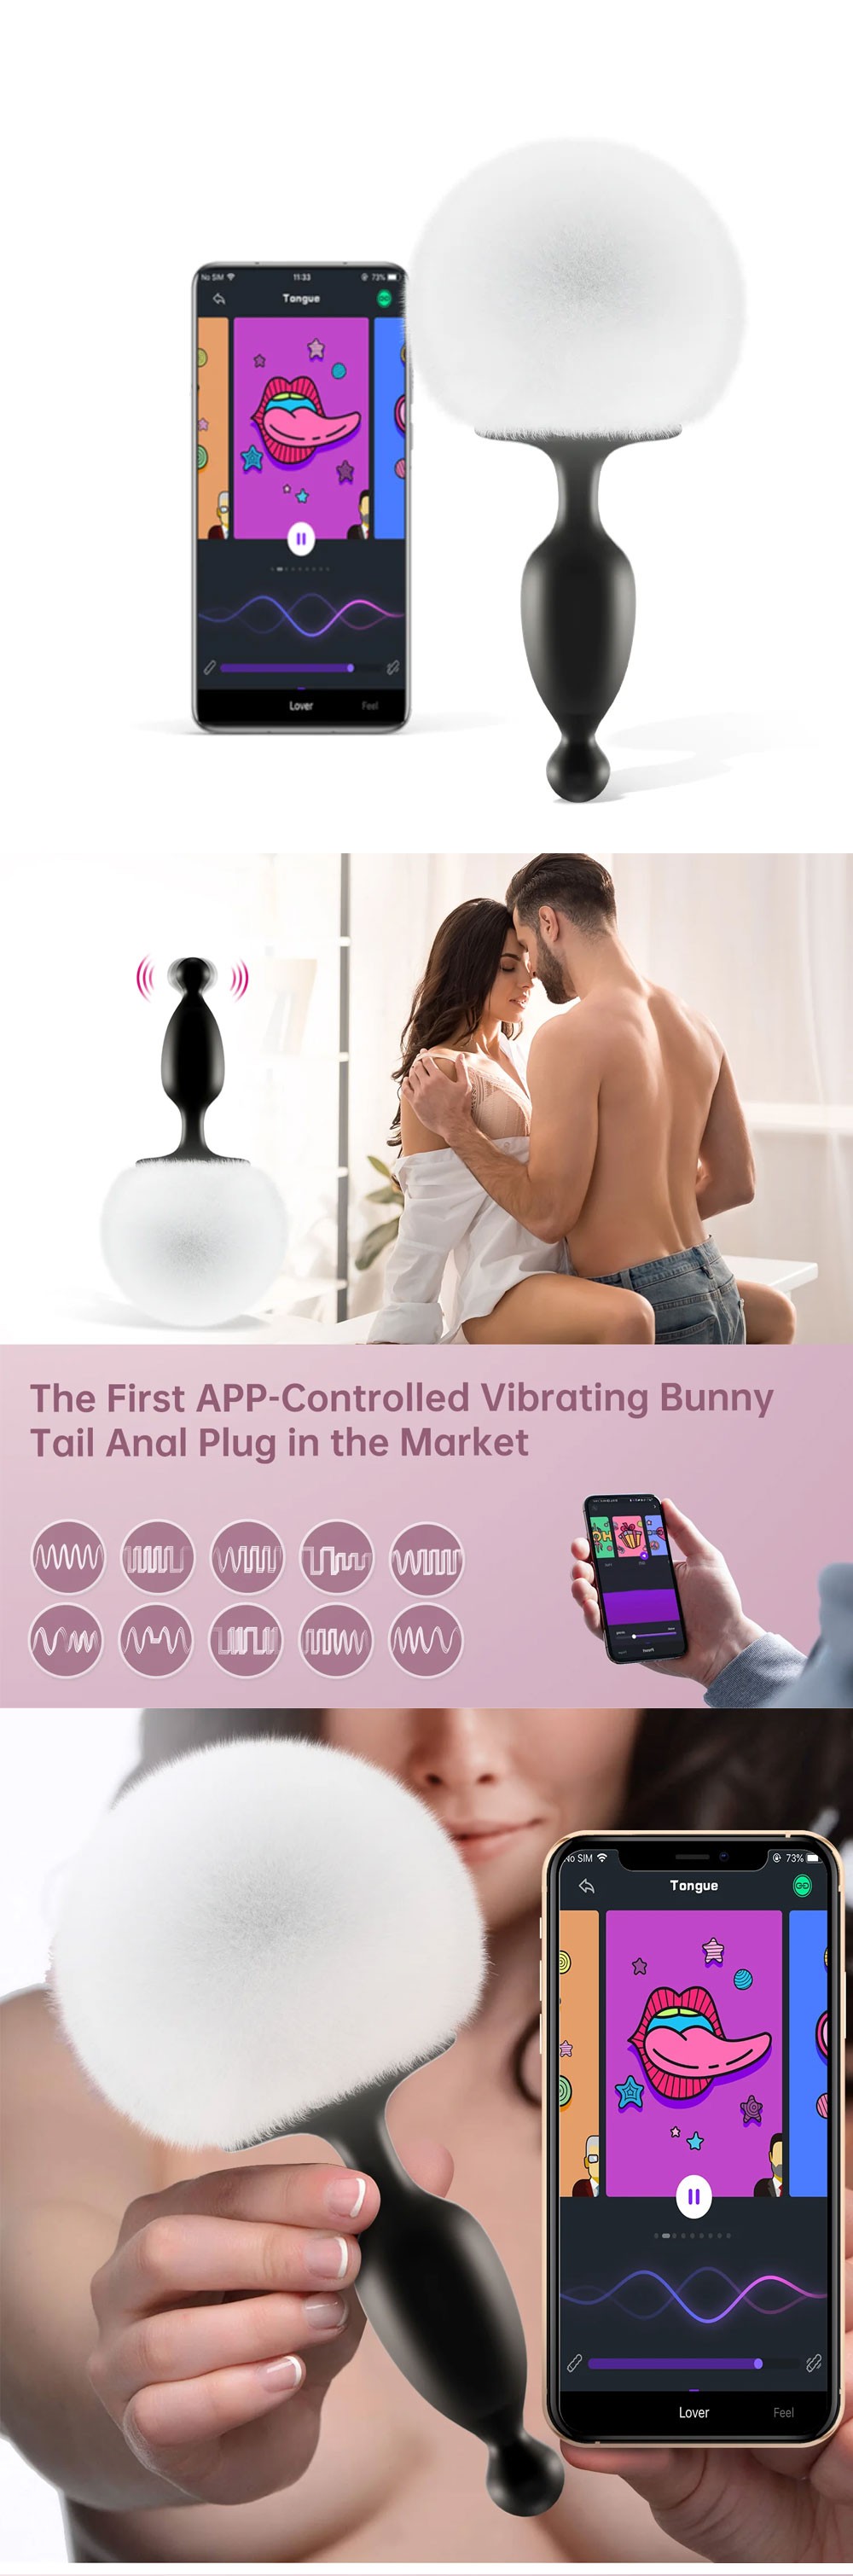 Magic Motion Bunny Tail Vibrating Anal Plug App Controlled